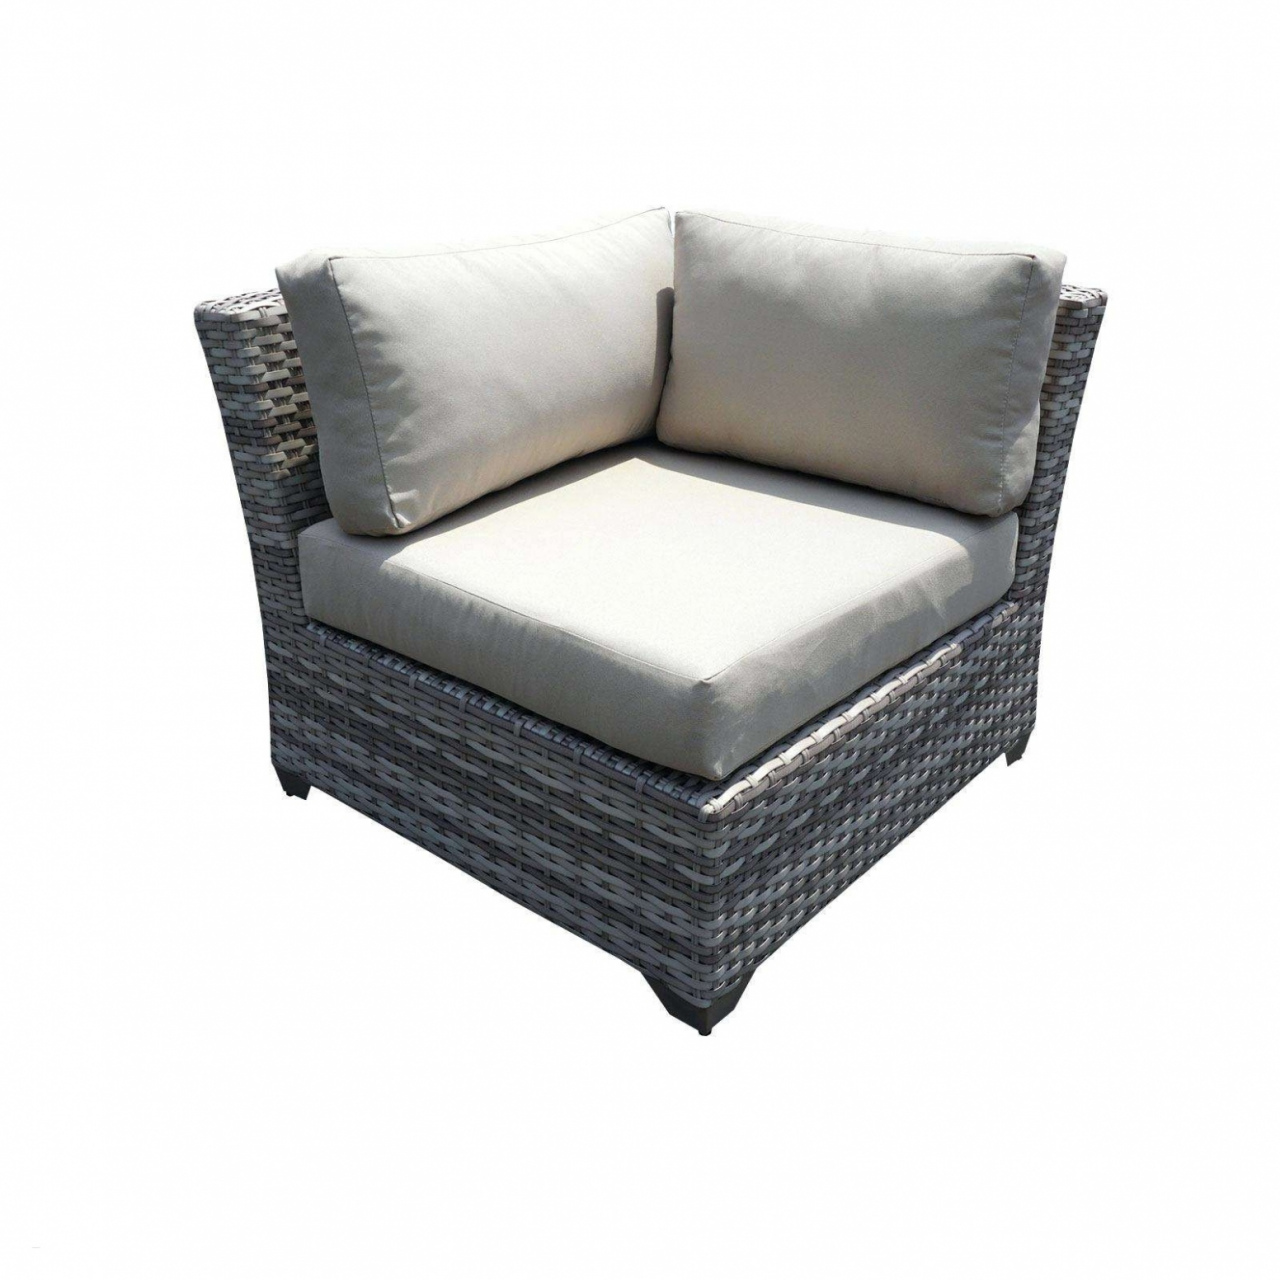 outdoor daybed couch discount luxus patio furniture daybed patio daybed 0d kimya durch outdoor daybed